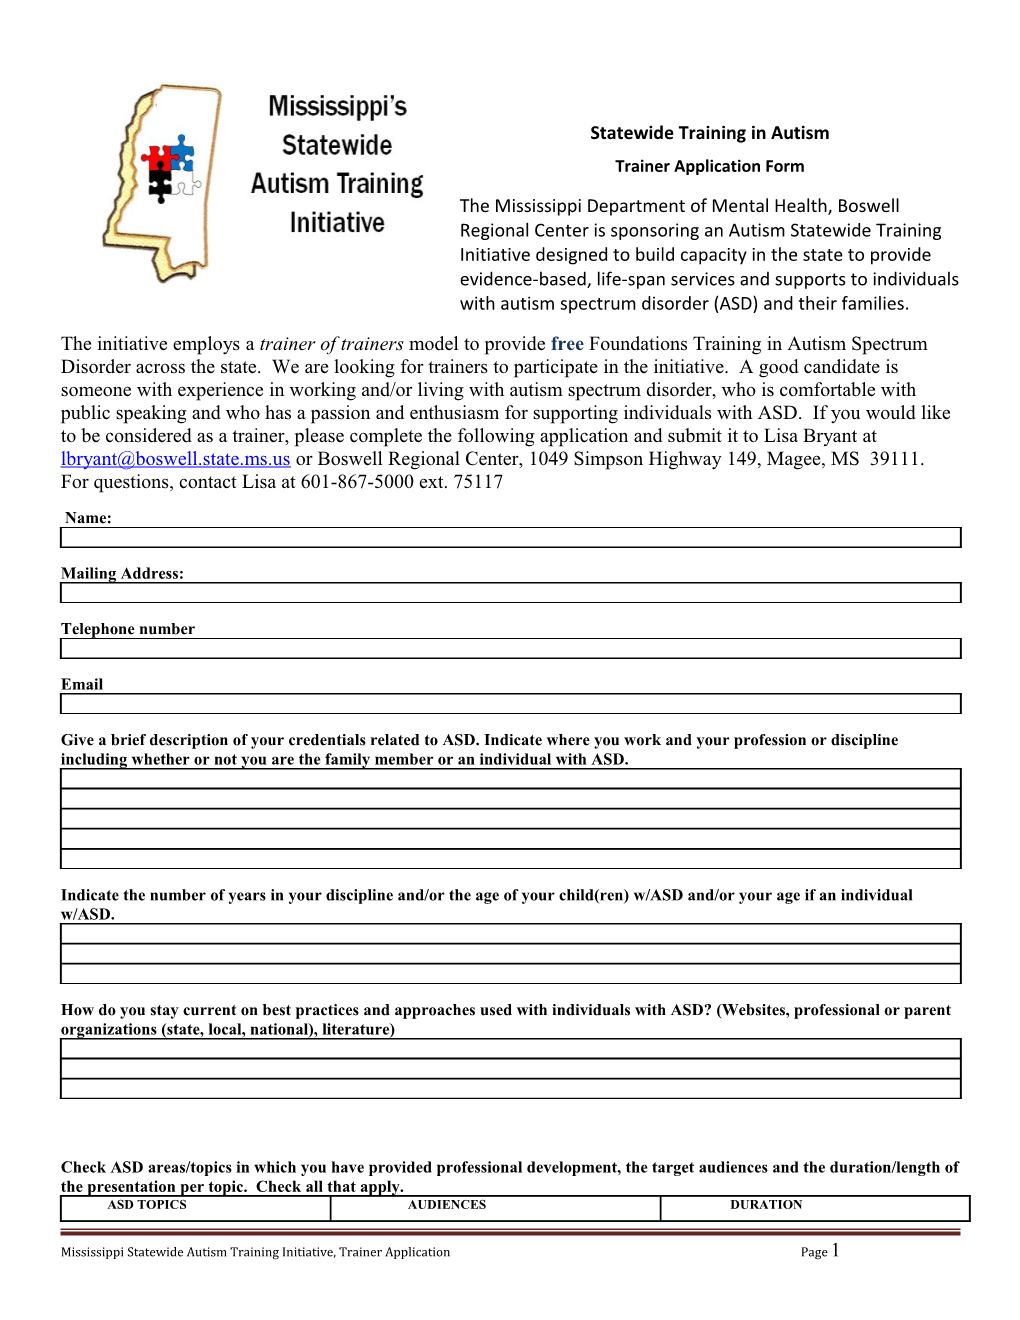 Statewide Training in Autism